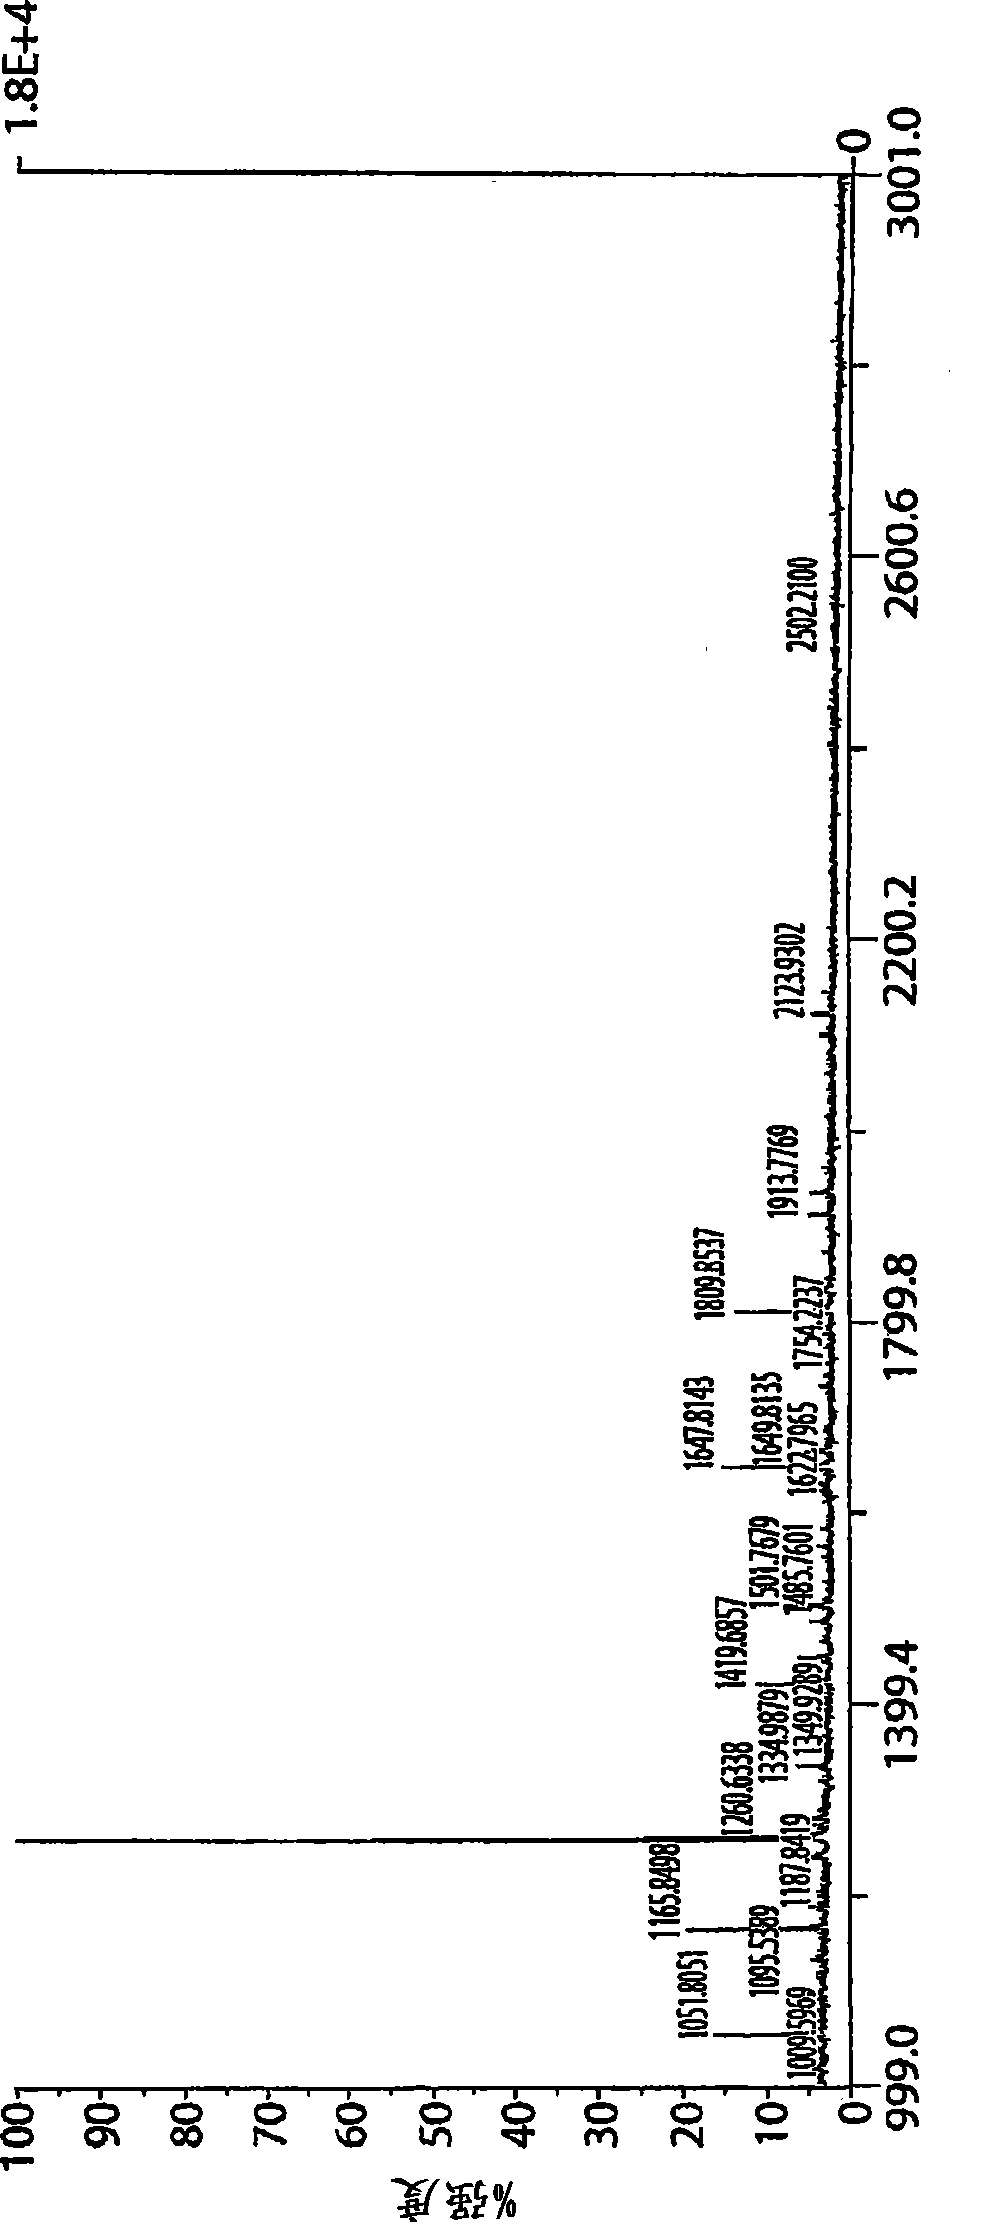 Antibodies with enhanced antibody-dependent cellular cytoxicity activity, methods of their production and use